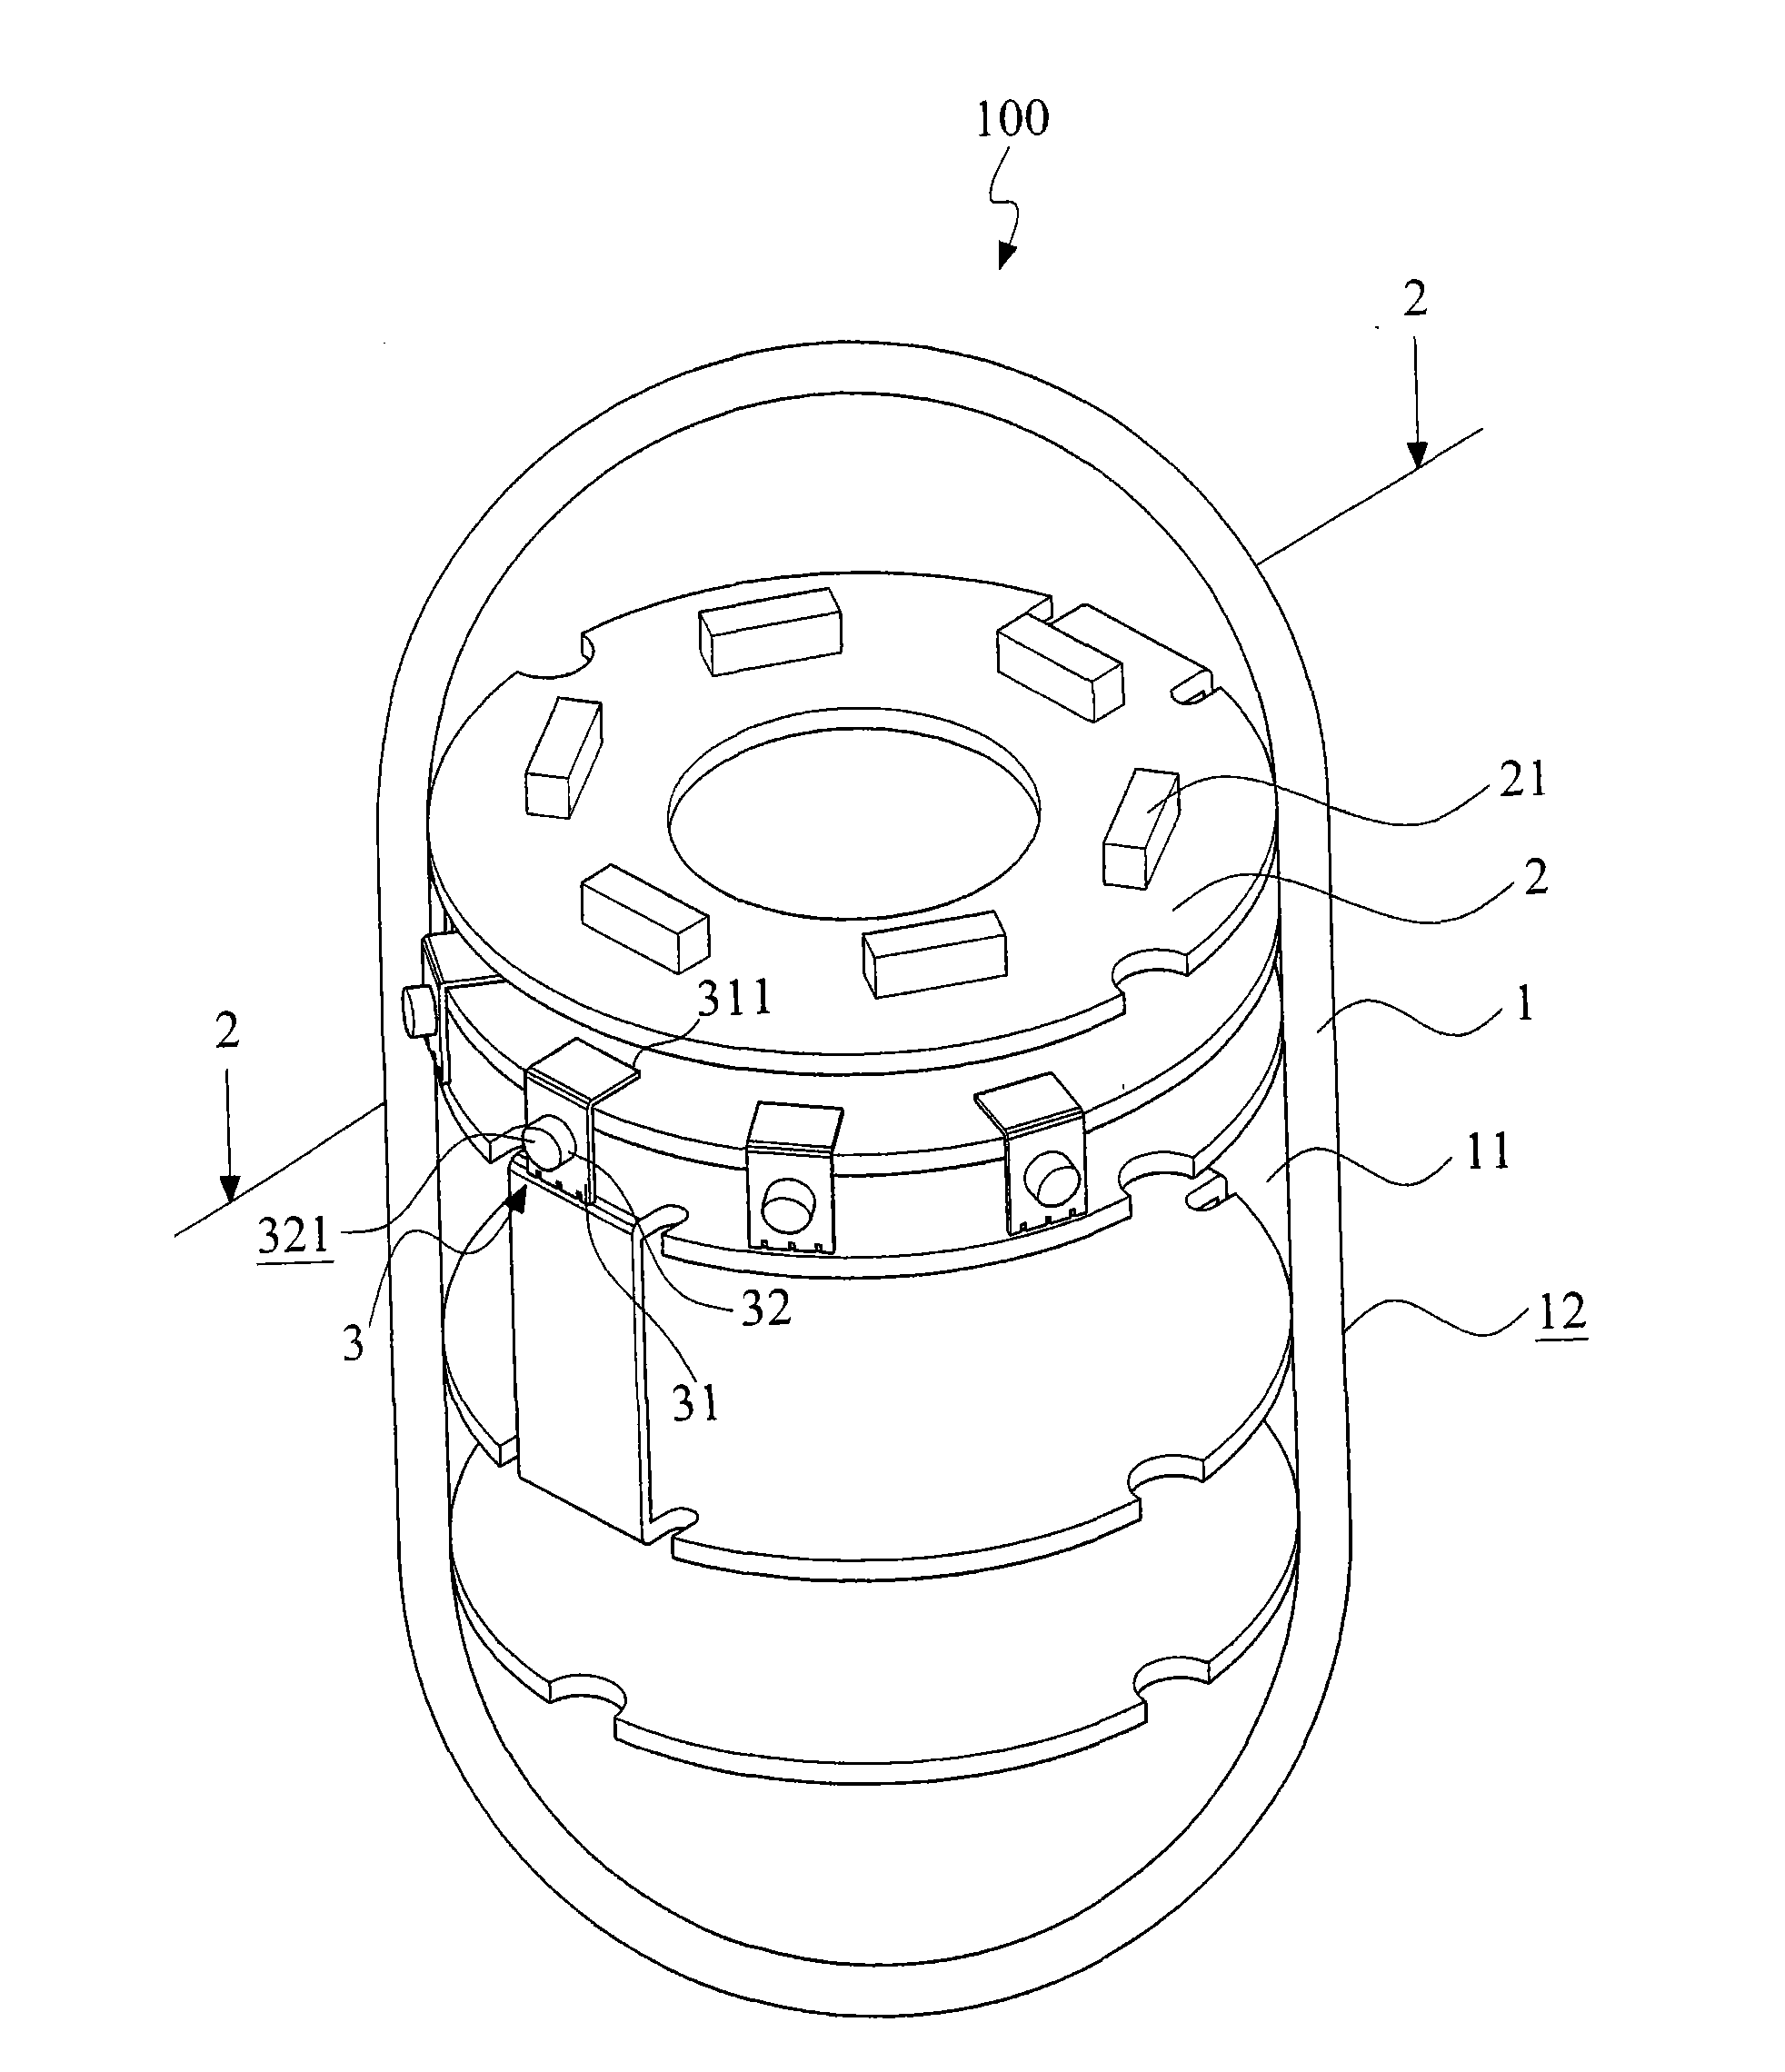 Endoscope capsule with metal implanting contact points